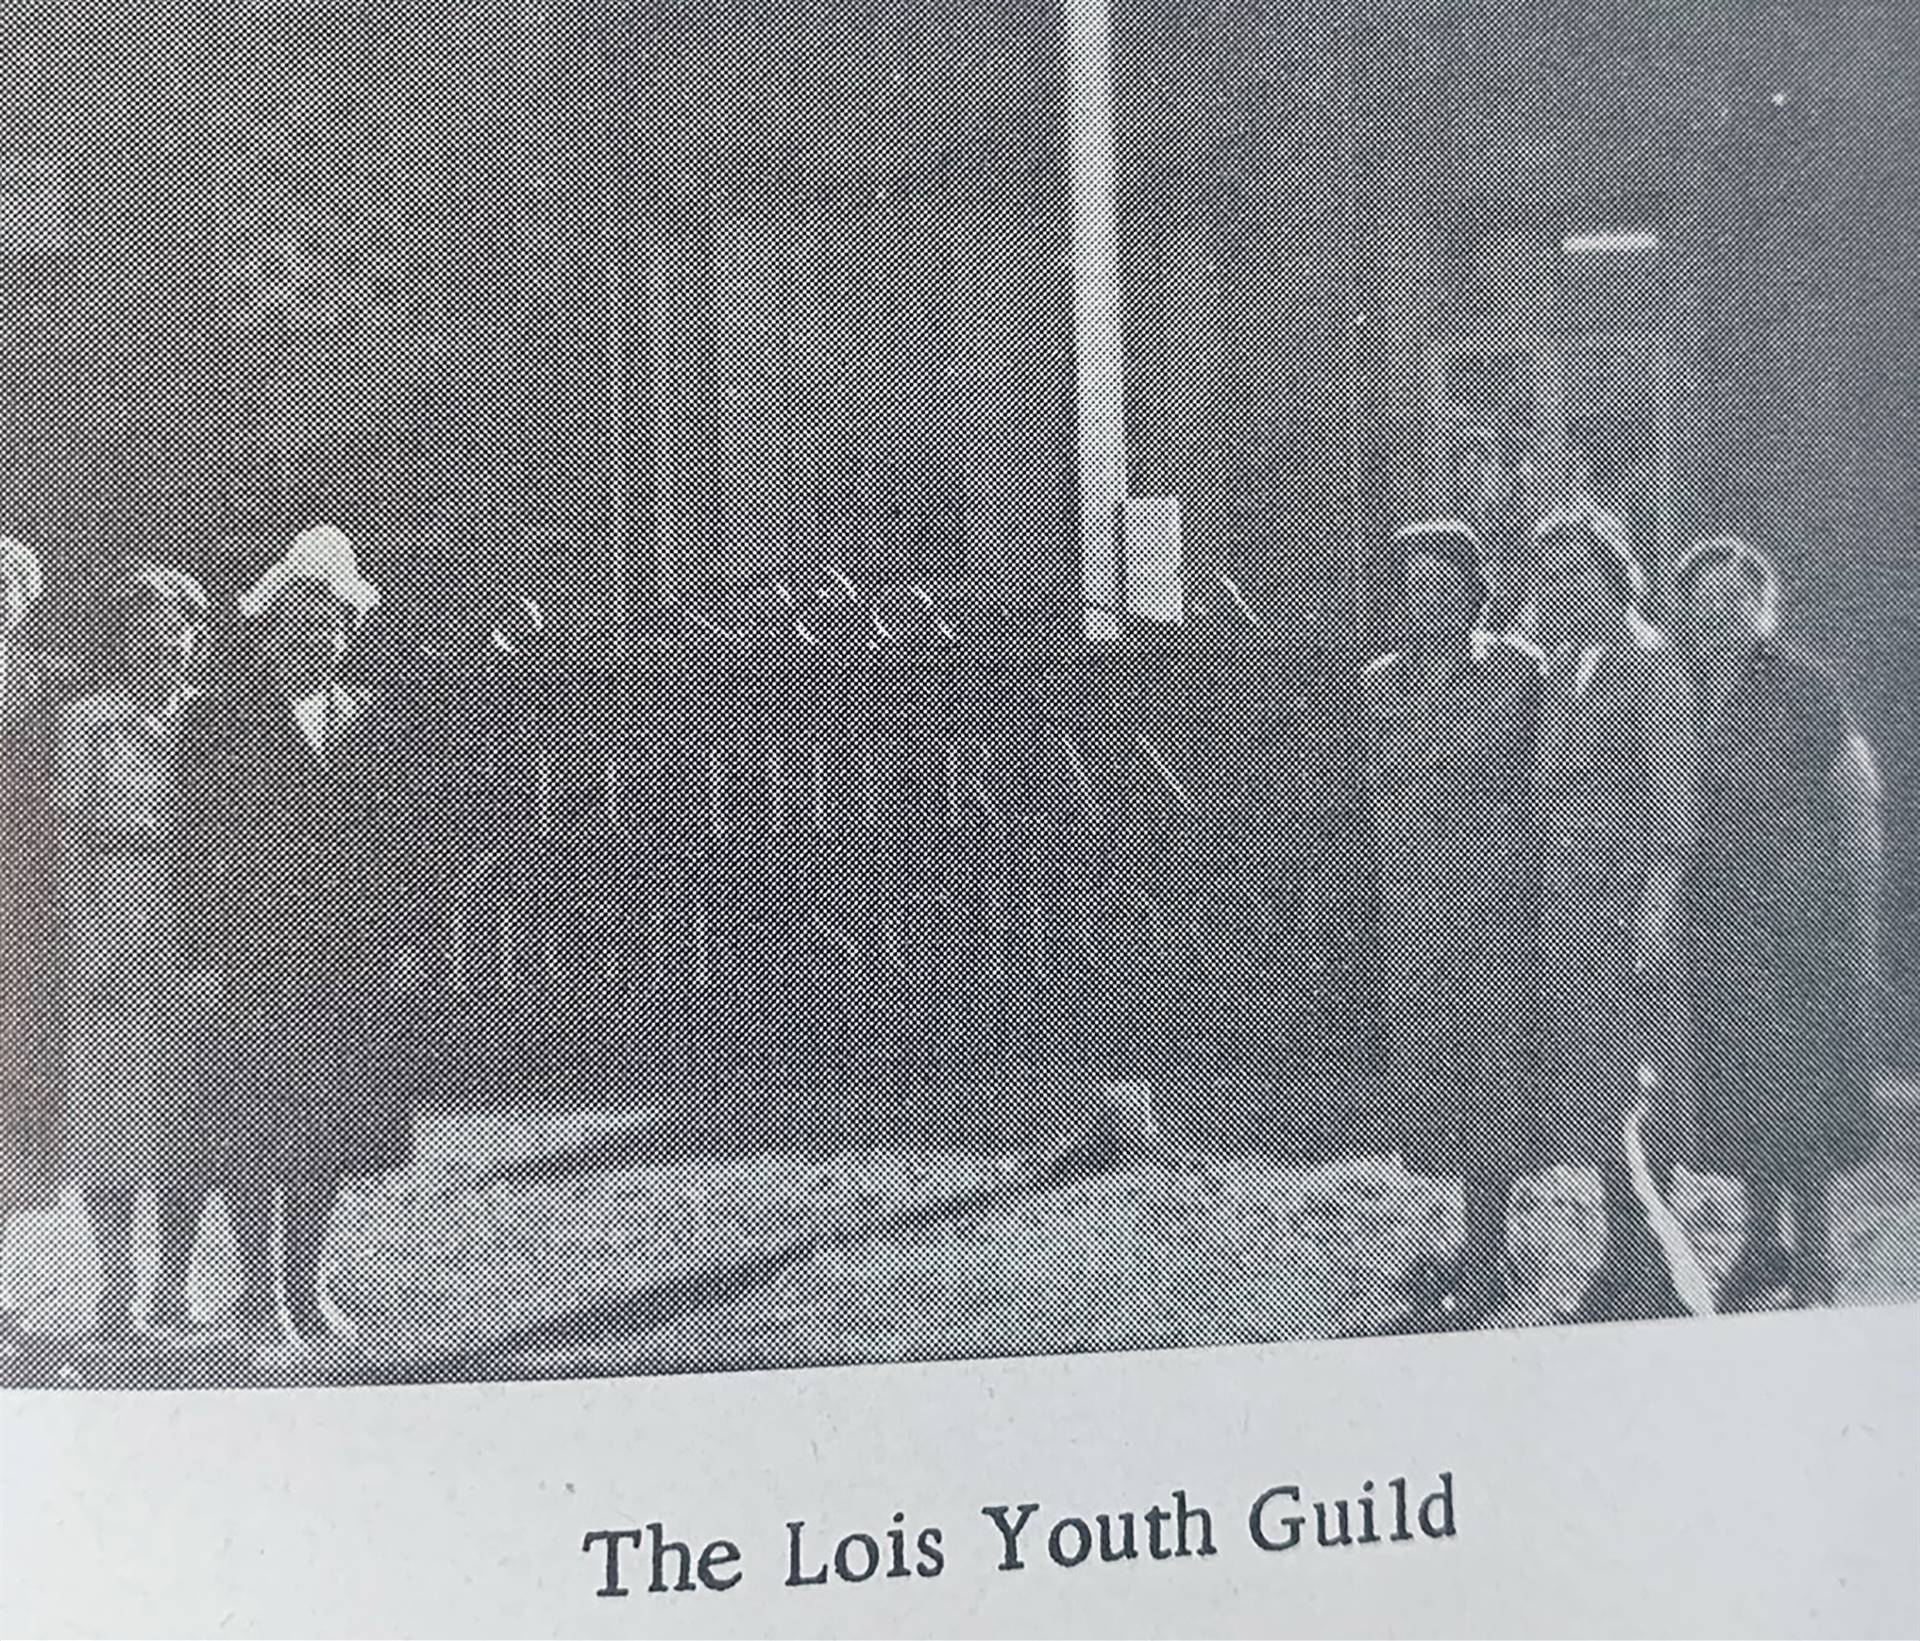 Lois Youth Guild